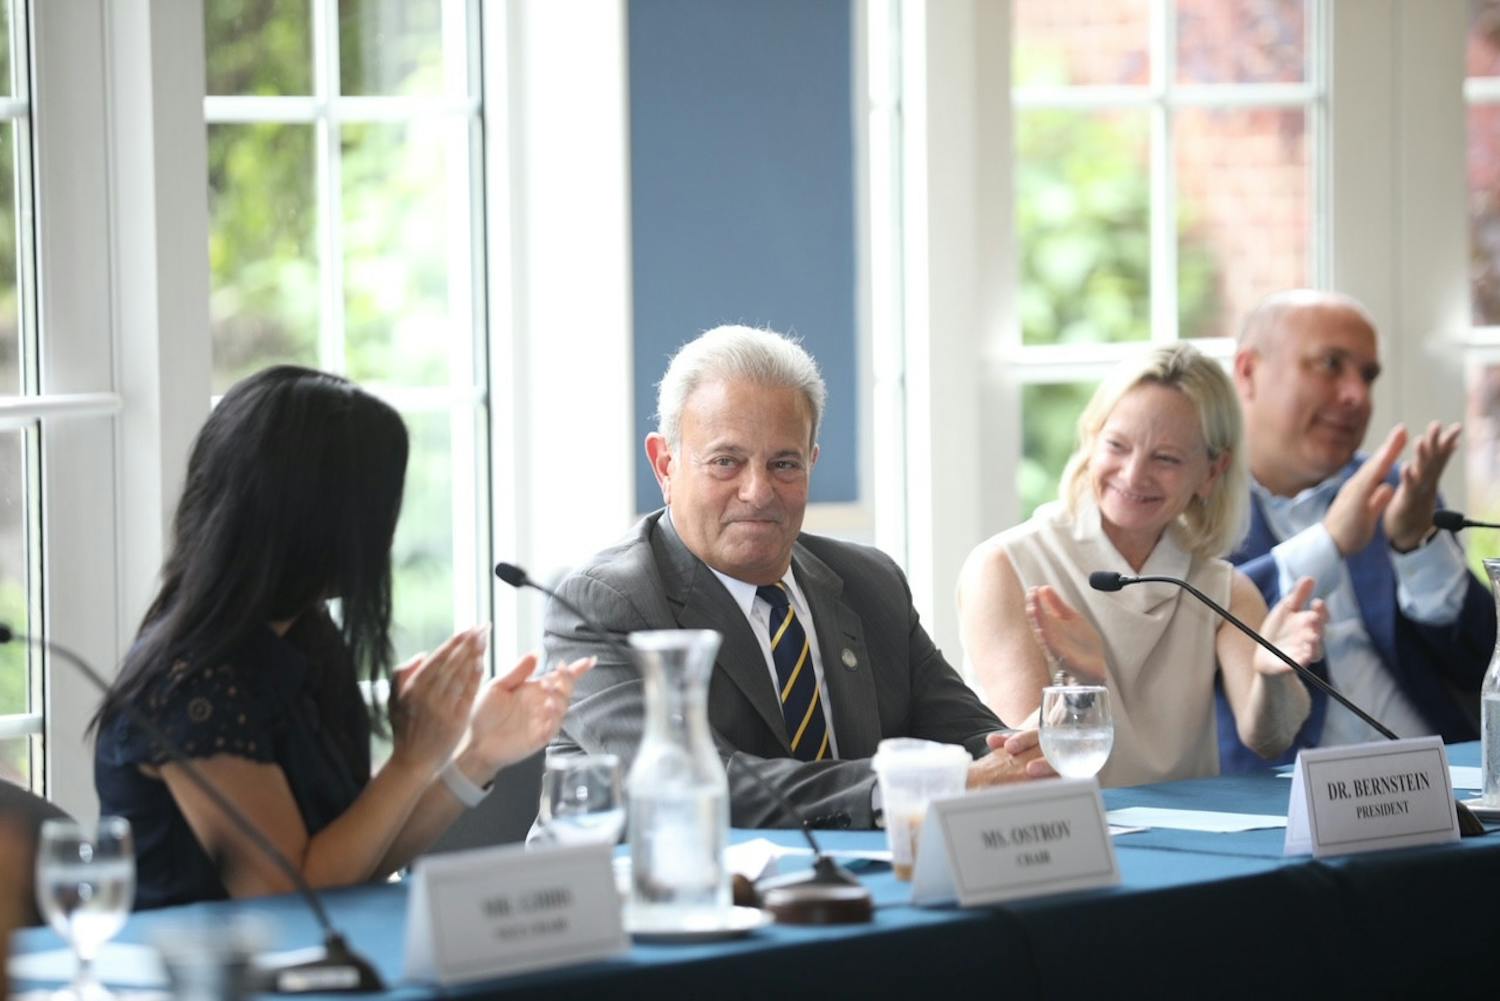 The Board of Trustees voted to name Michael Bernstein the 17th president of the College at its June 6 meeting (Photo courtesy of TCNJ / Anthony DePrimo).